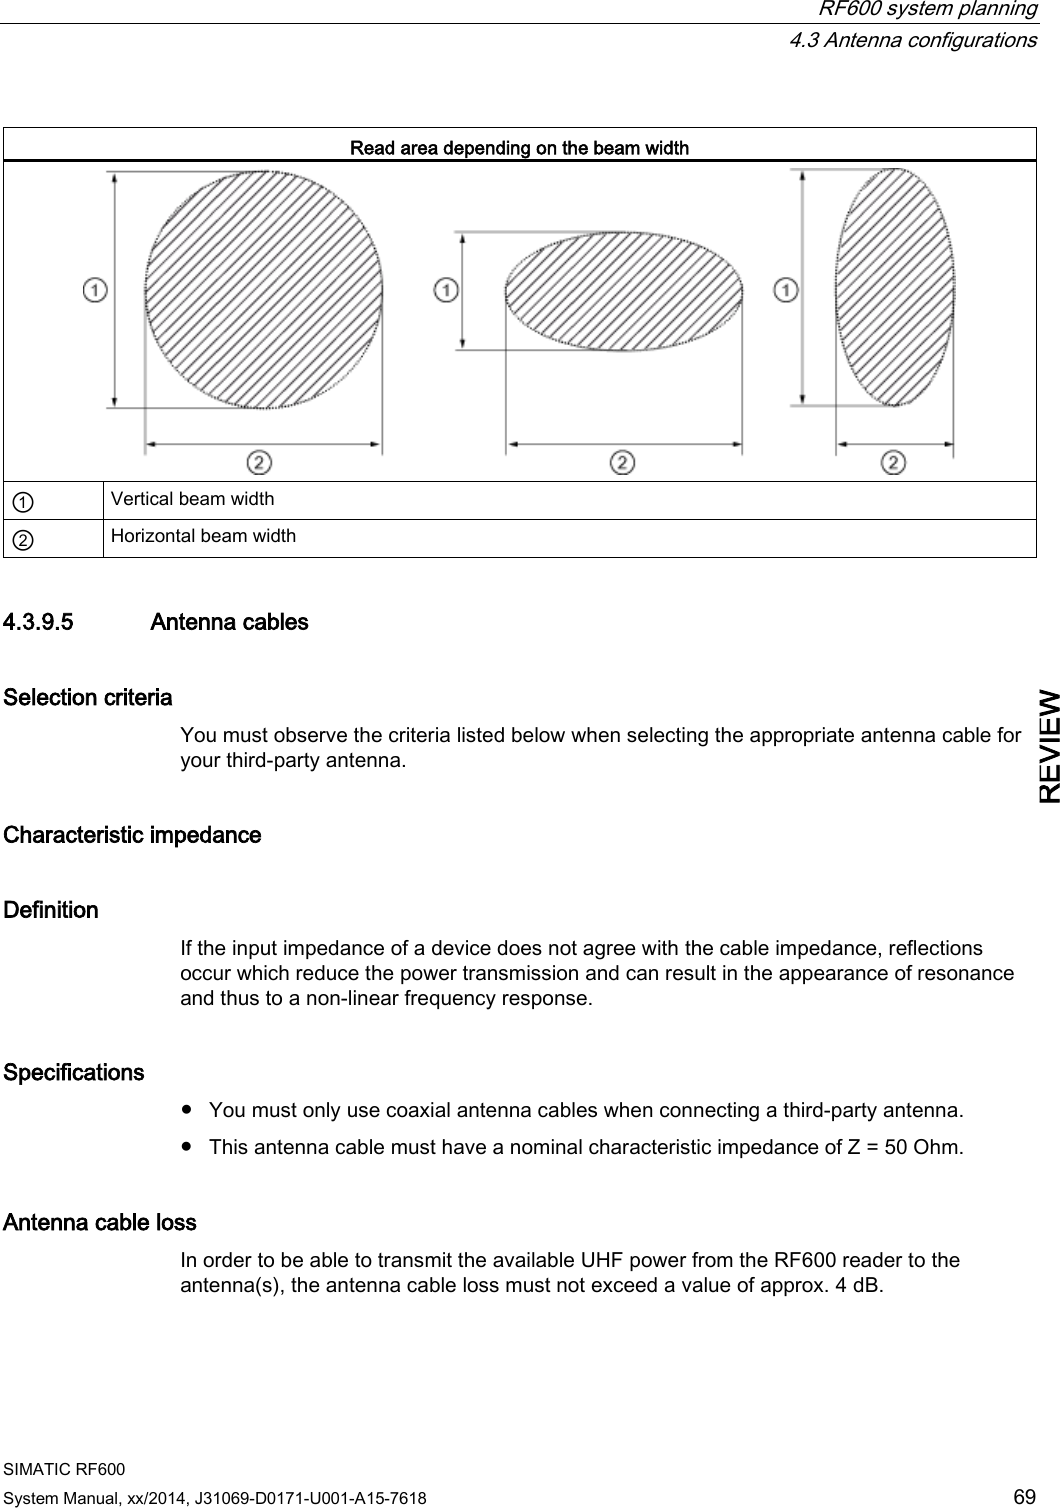  RF600 system planning  4.3 Antenna configurations SIMATIC RF600 System Manual, xx/2014, J31069-D0171-U001-A15-7618 69 REVIEW  Read area depending on the beam width  ① Vertical beam width ② Horizontal beam width 4.3.9.5 Antenna cables Selection criteria You must observe the criteria listed below when selecting the appropriate antenna cable for your third-party antenna. Characteristic impedance Definition If the input impedance of a device does not agree with the cable impedance, reflections occur which reduce the power transmission and can result in the appearance of resonance and thus to a non-linear frequency response. Specifications ● You must only use coaxial antenna cables when connecting a third-party antenna. ● This antenna cable must have a nominal characteristic impedance of Z = 50 Ohm. Antenna cable loss In order to be able to transmit the available UHF power from the RF600 reader to the antenna(s), the antenna cable loss must not exceed a value of approx. 4 dB. 